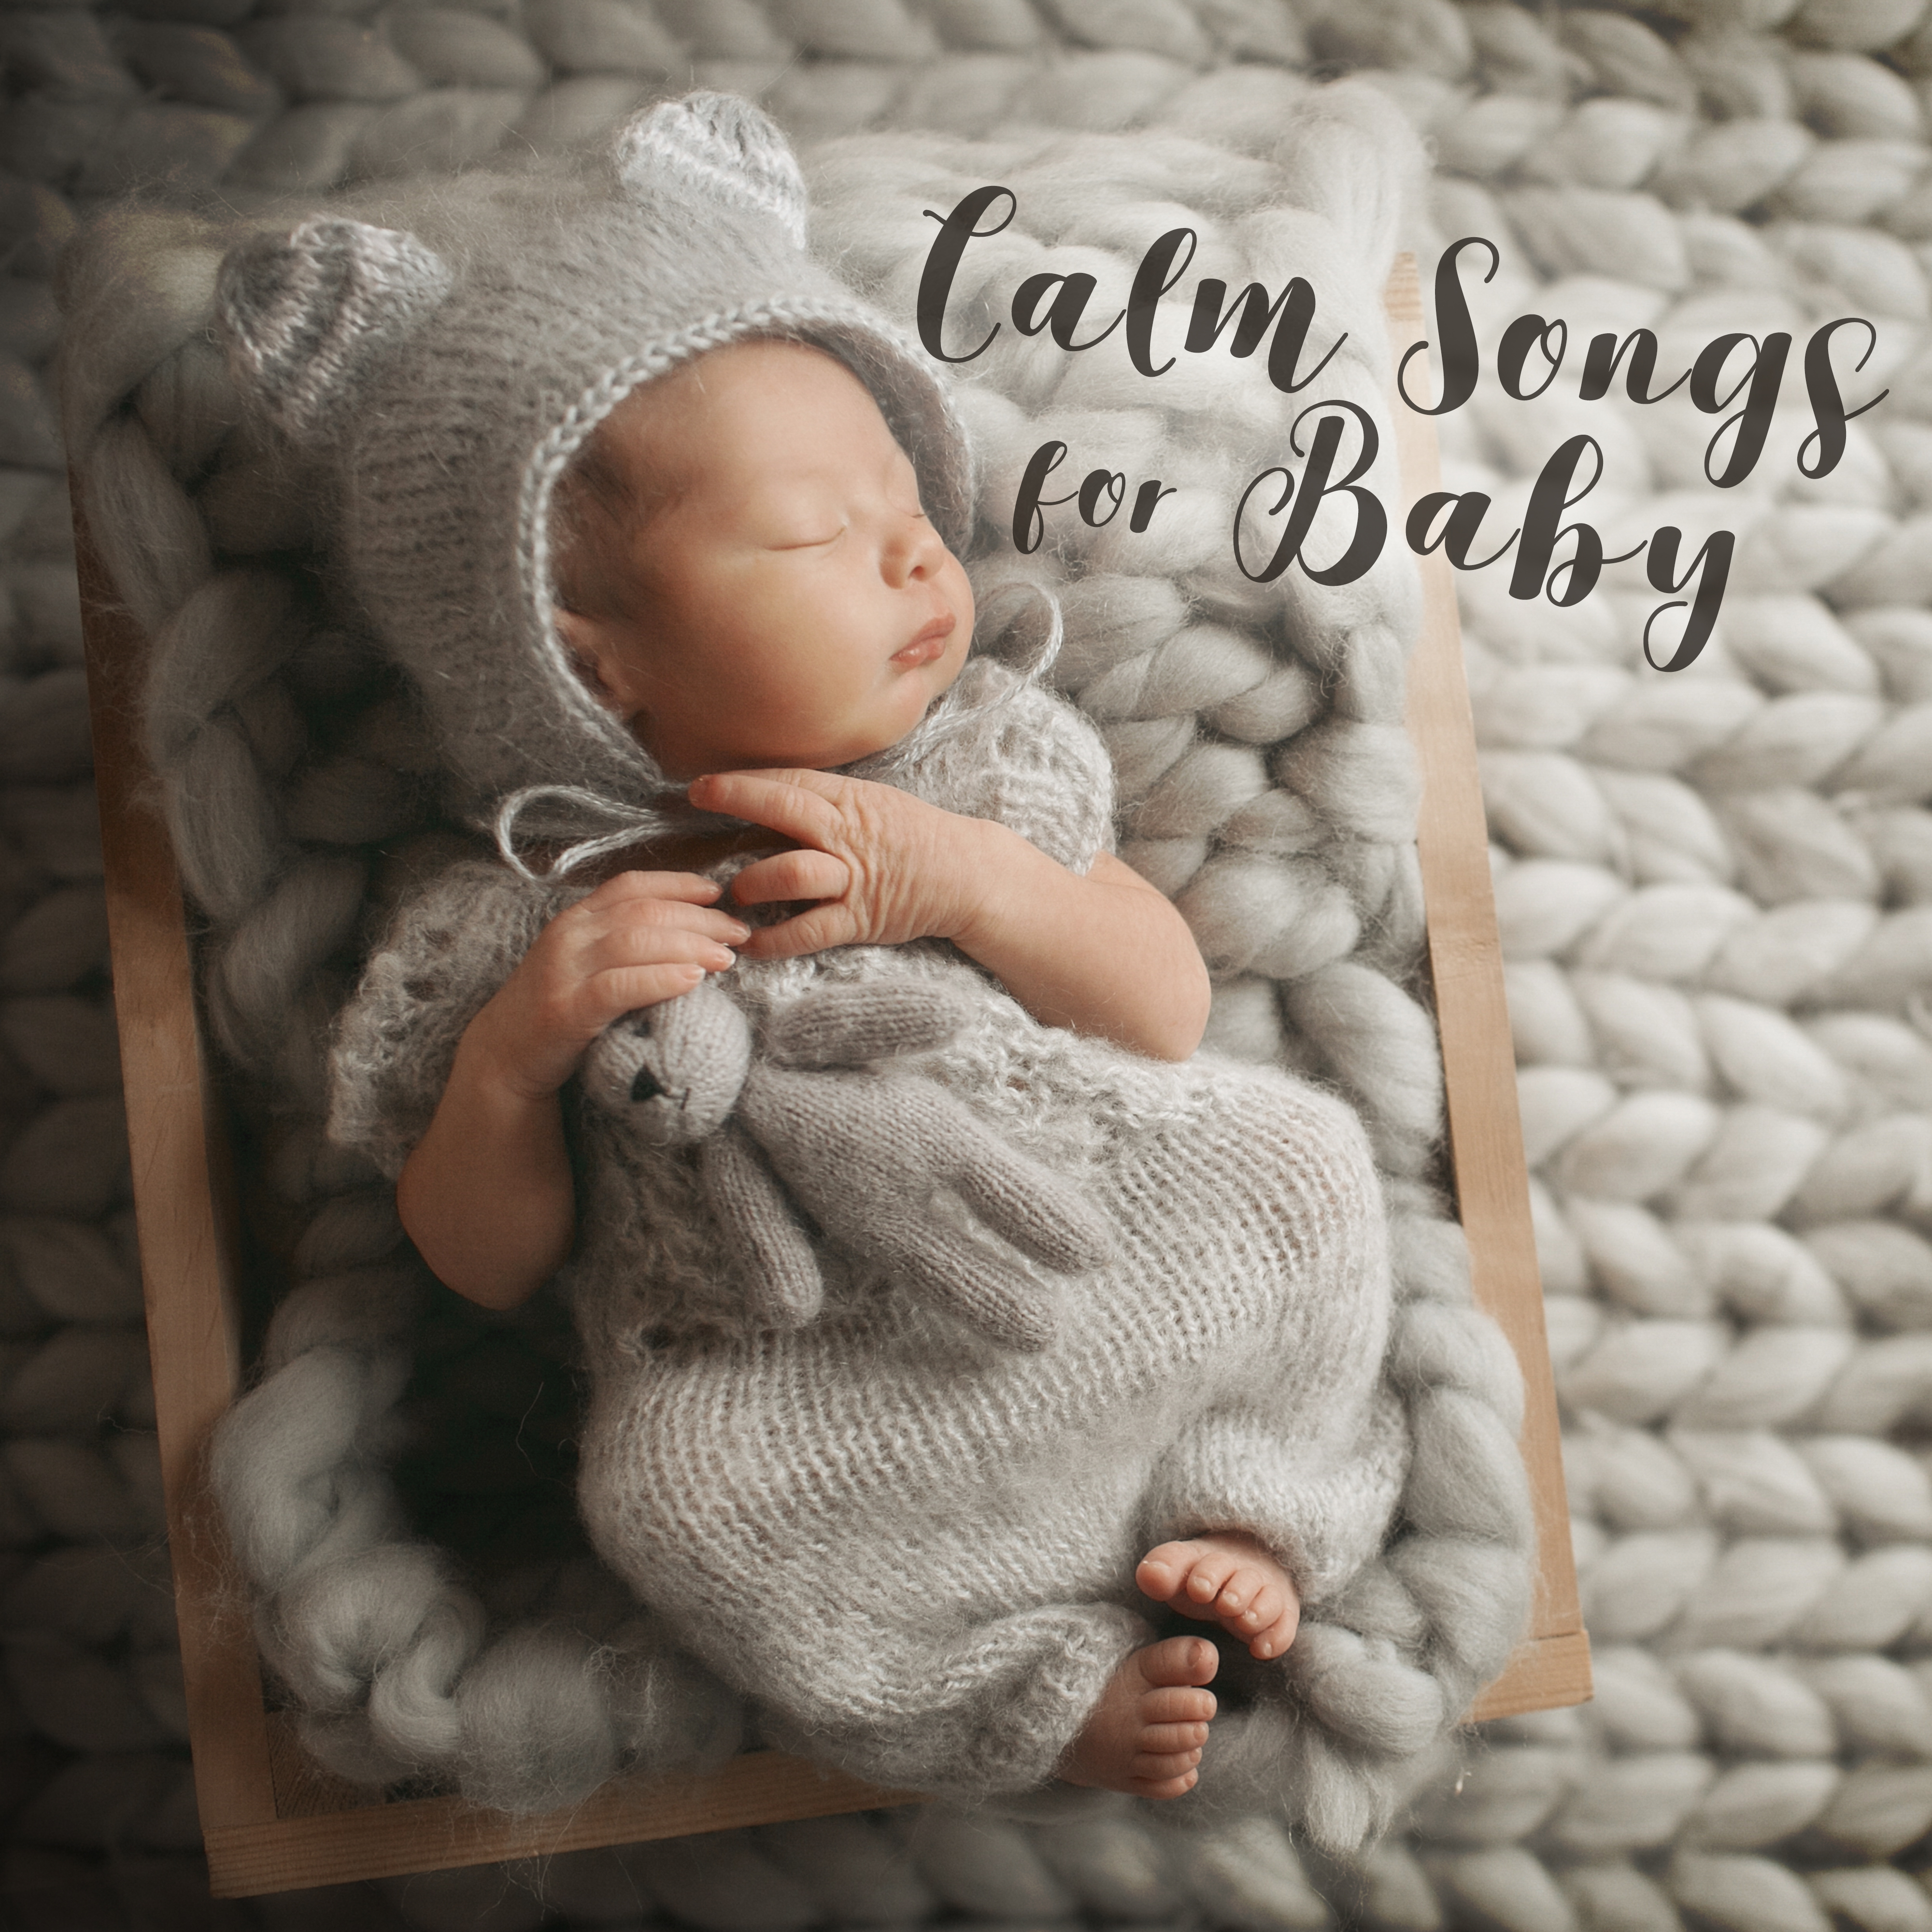 Calm Songs for Baby